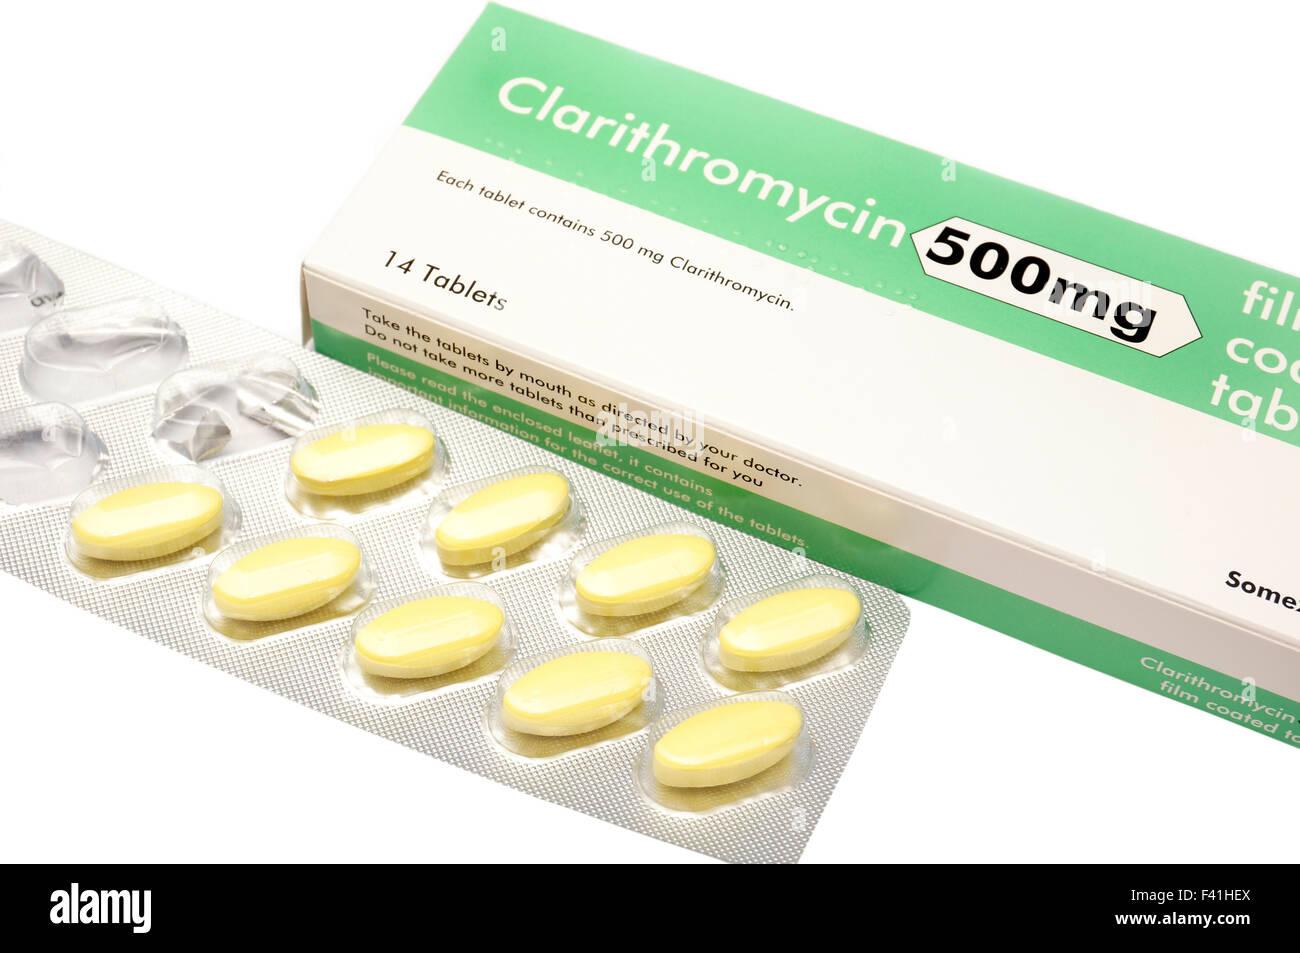 picture of clarithromycin 500mg tablets